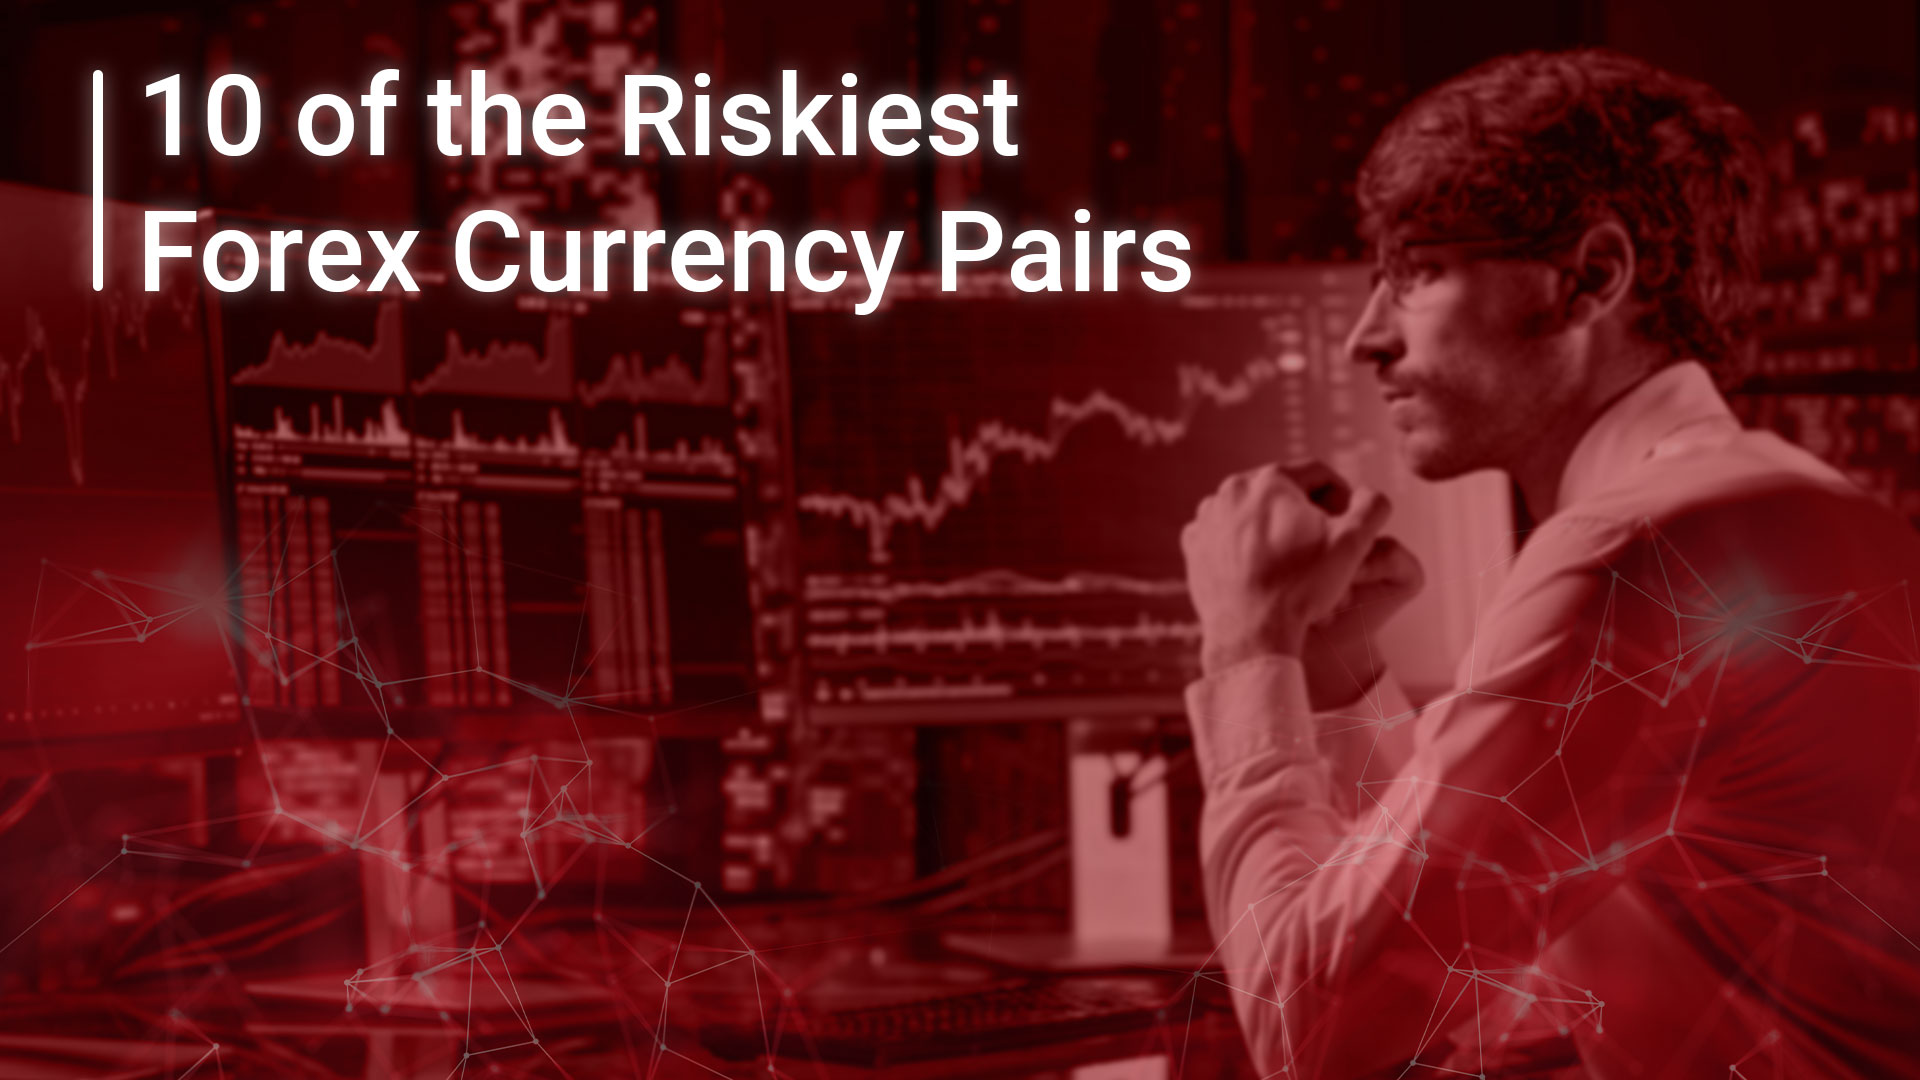 10 of the riskiest forex currency pairs